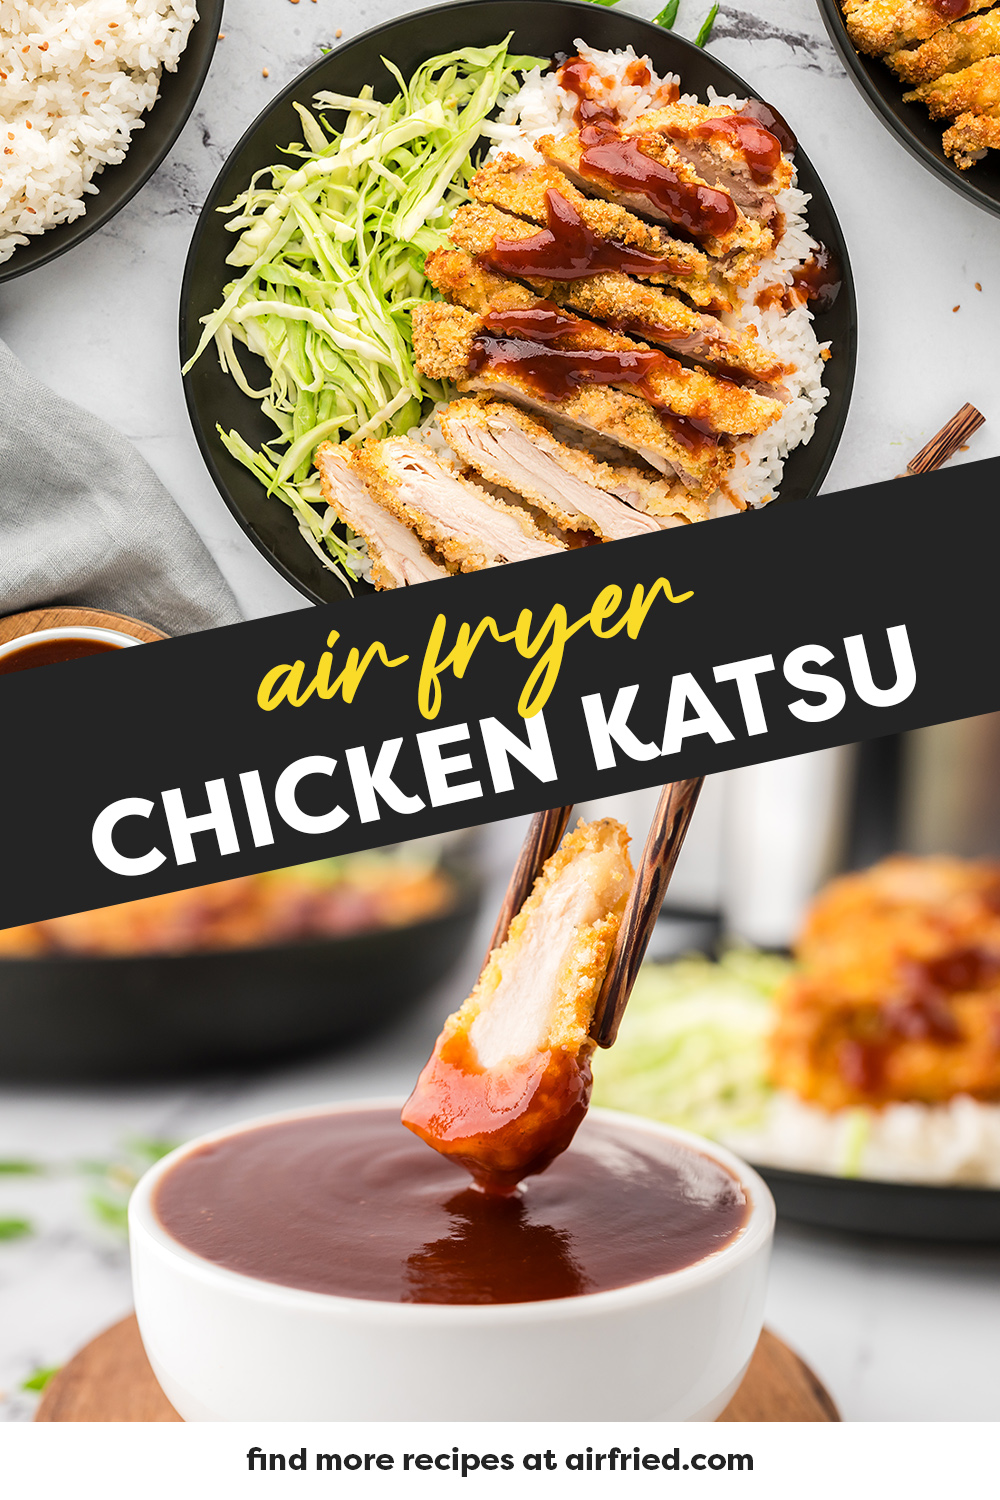 This chicken katsu was cooked in the air fryer, which is always great.  Then we topped it with amazing tonkatsu sauce!